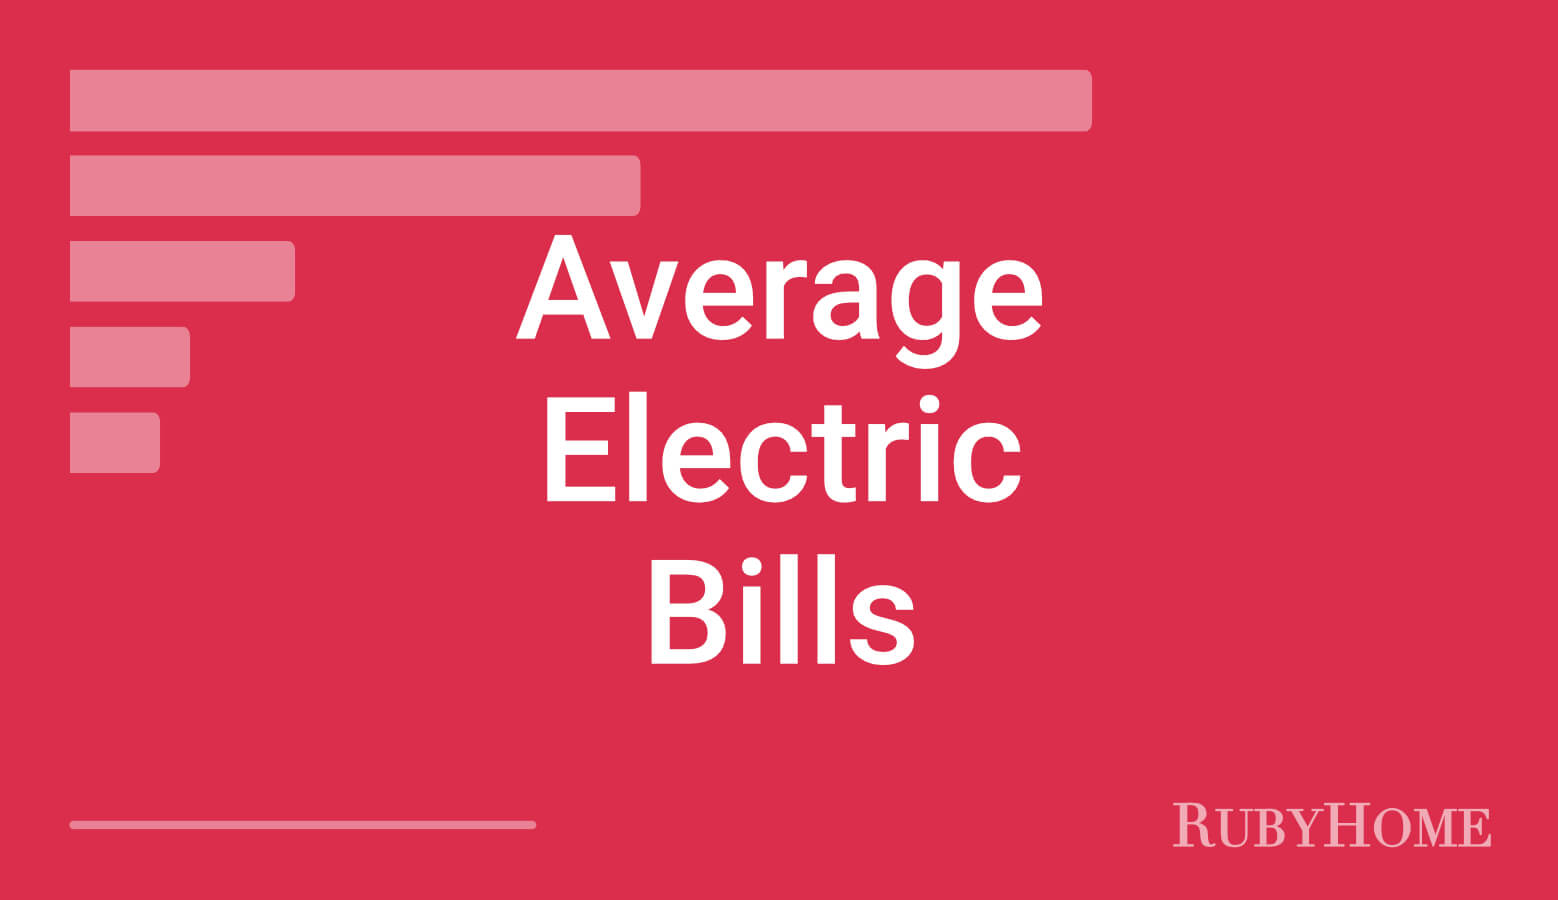 Average Electric Bills in United States